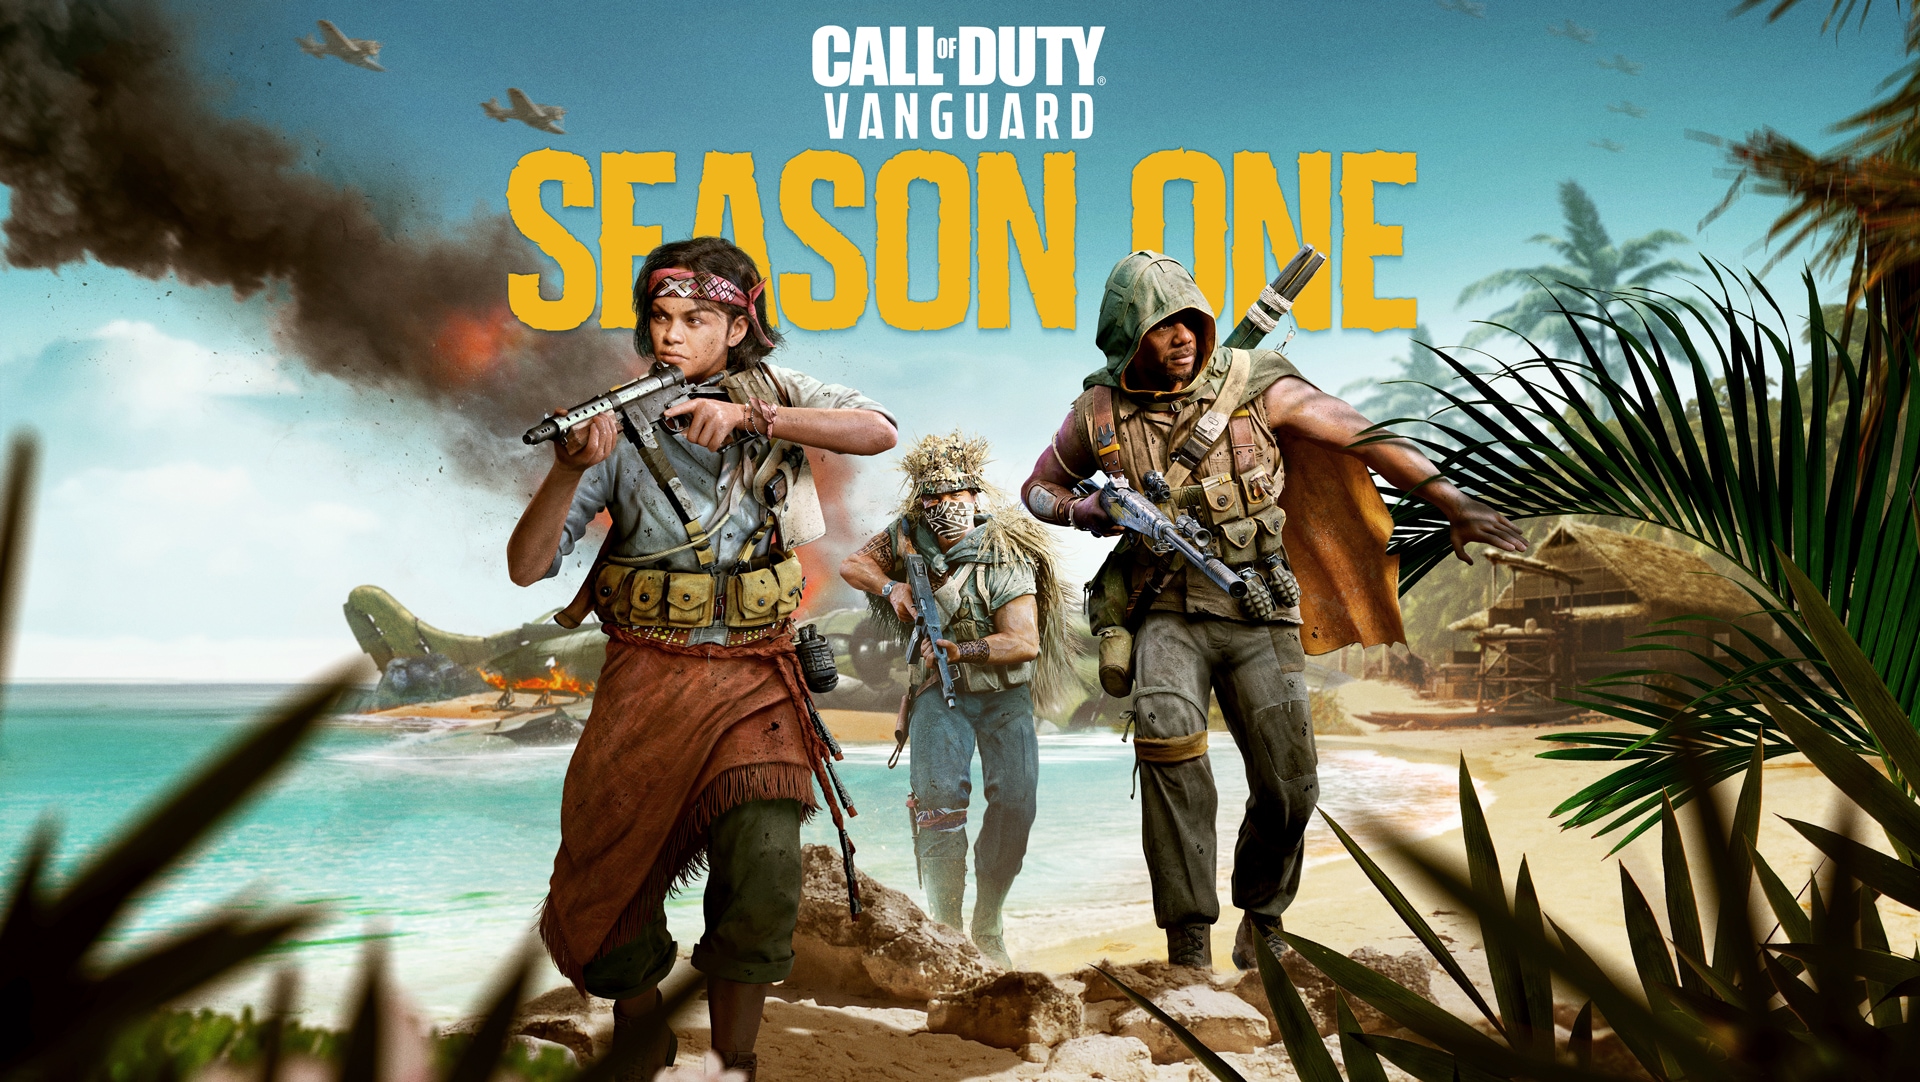 Welcome to the Pacific—everything you need to know about Call of Duty: Vanguard Season One